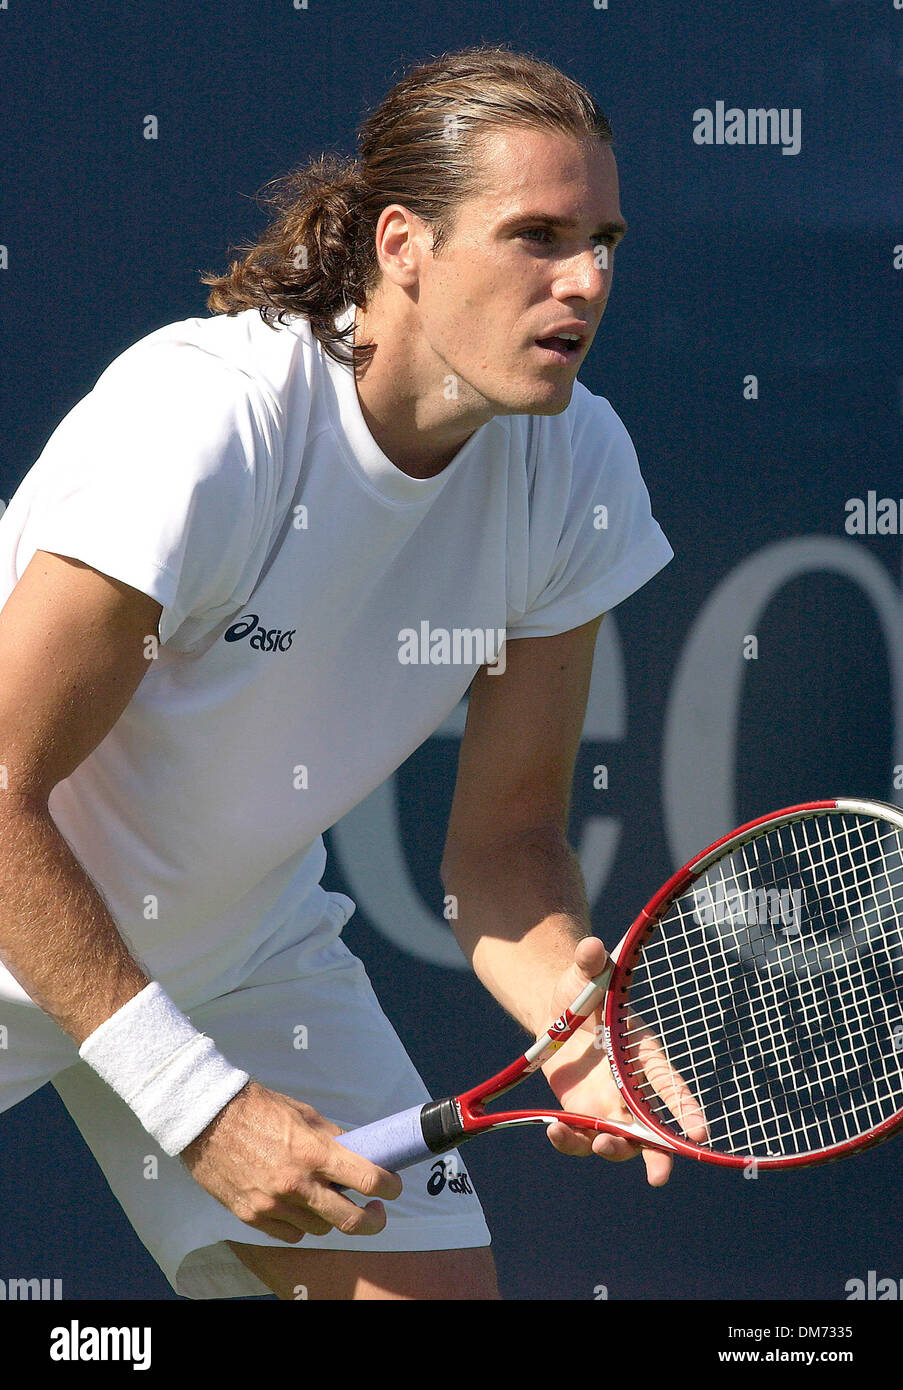 July 26, 2005; Los Angeles, CA, USA; ATP tennis player TOMMY HAAS during  the Mercedes-Benz Cup at the Los Angeles Tennis Center. Mandatory Credit:  Photo by Vaughn Youtz/ZUMA Press. (©) Copyright 2005